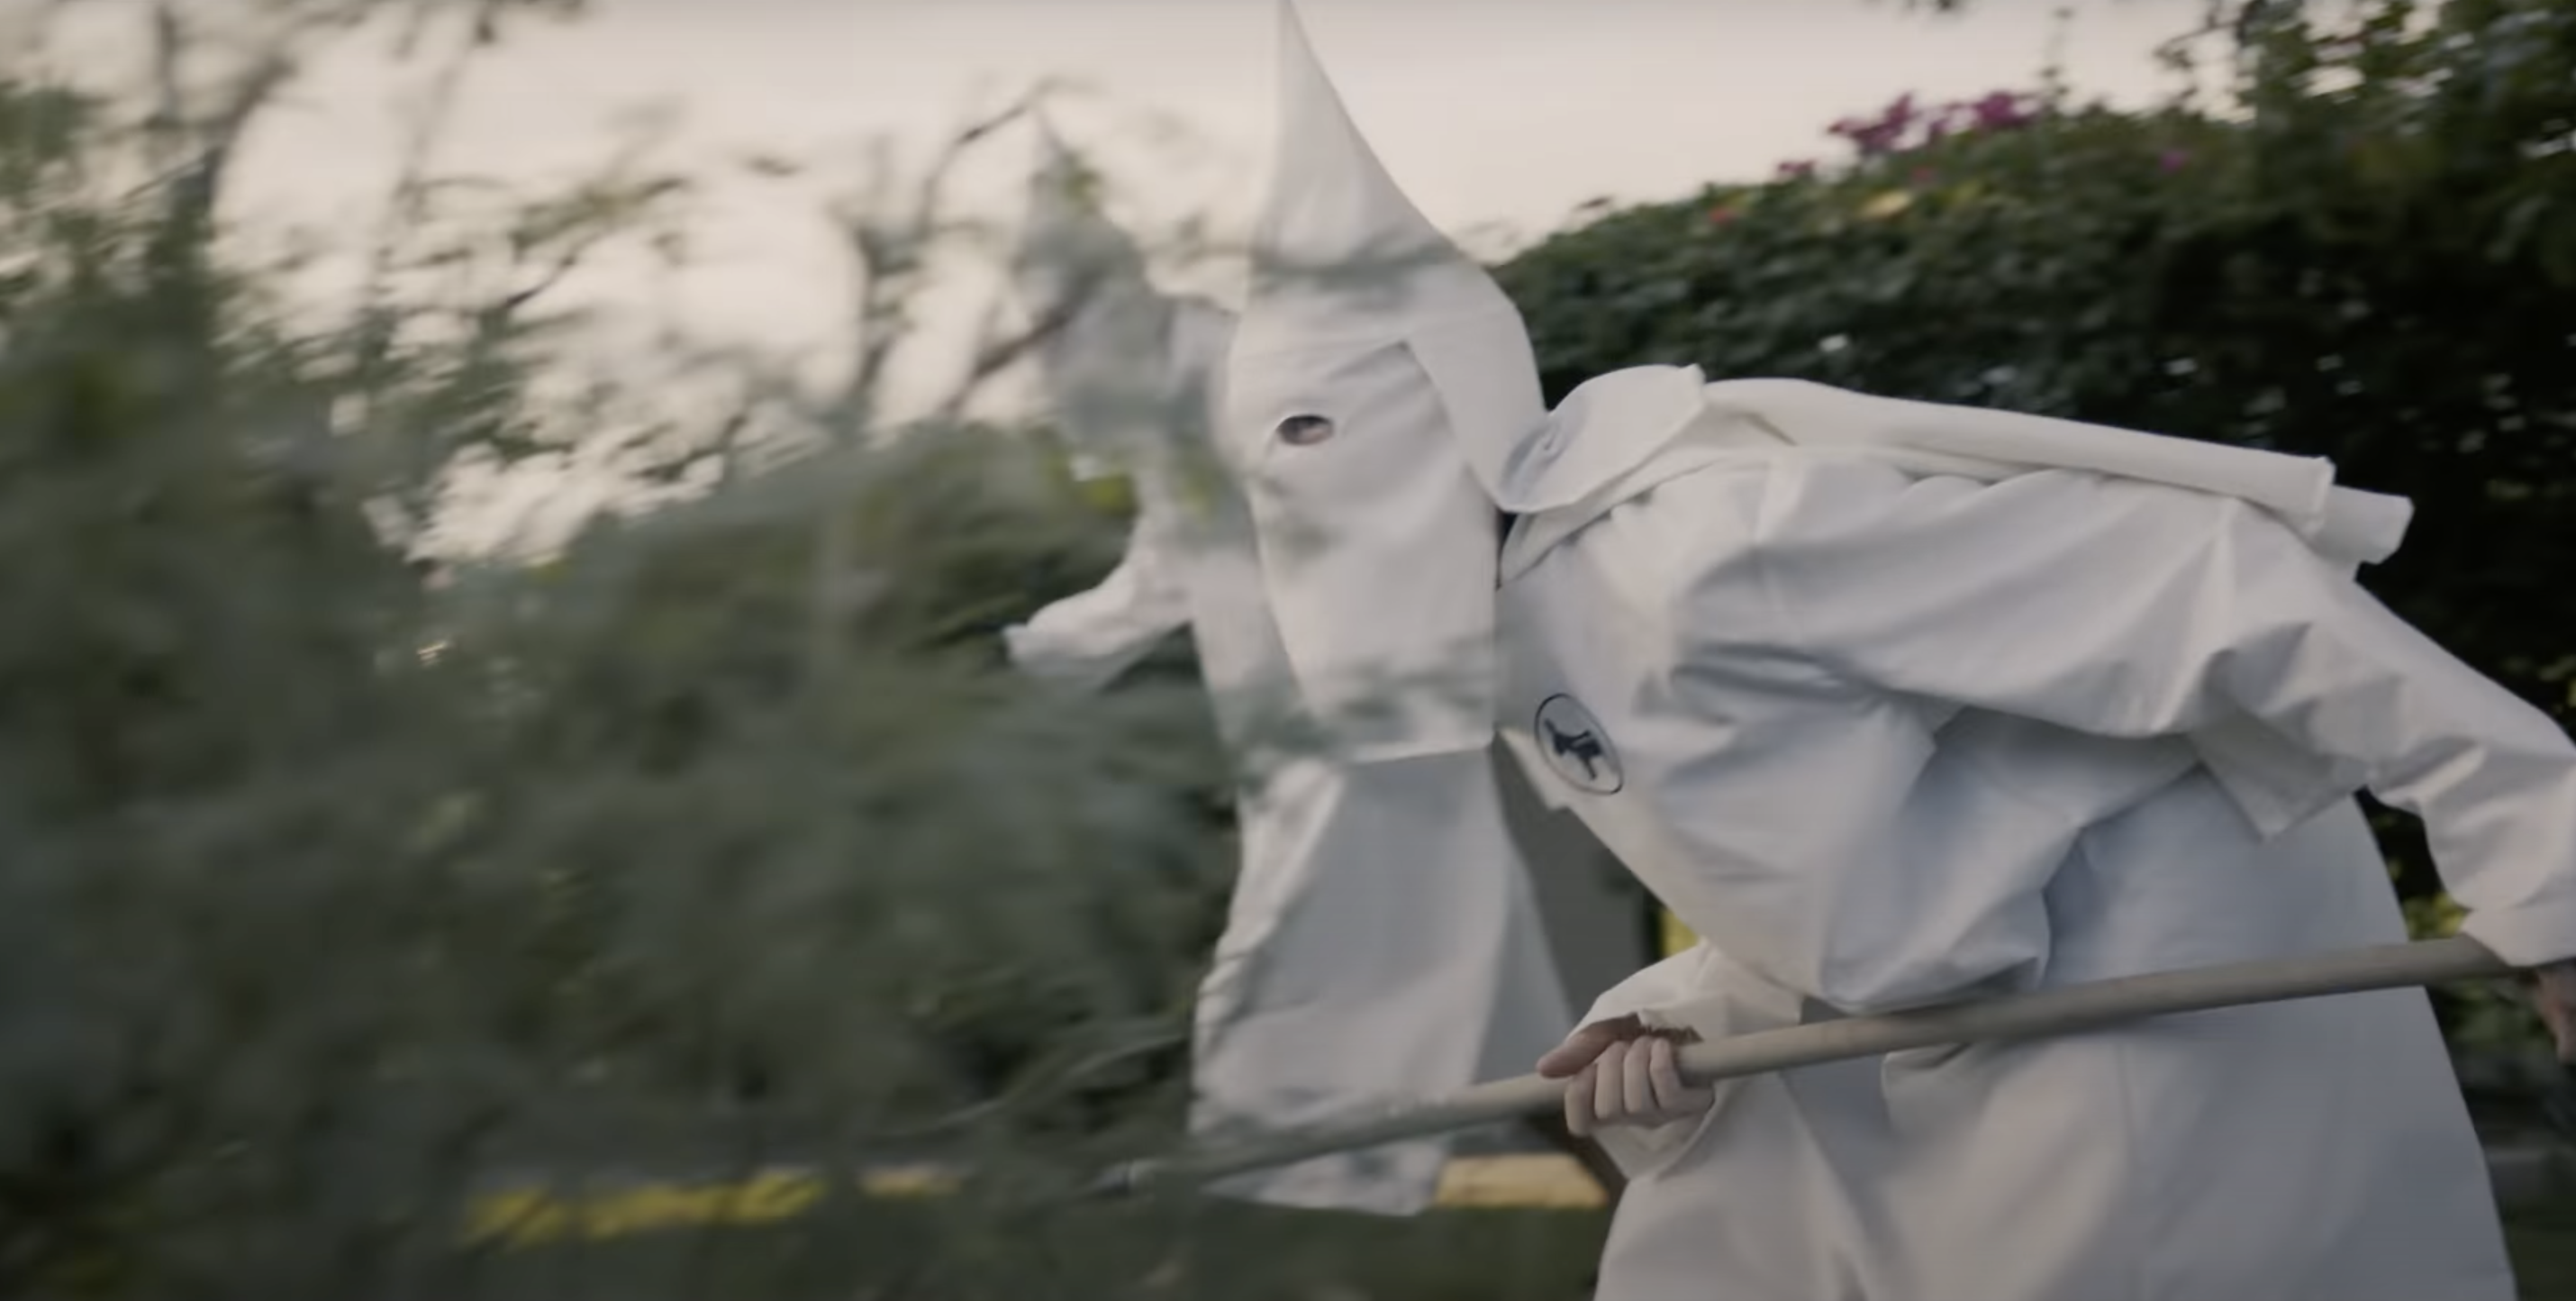 Congressional Candidate Jerone Davison Rightly Calls Out Democrats As KKK In Stunning Ad For 2FA